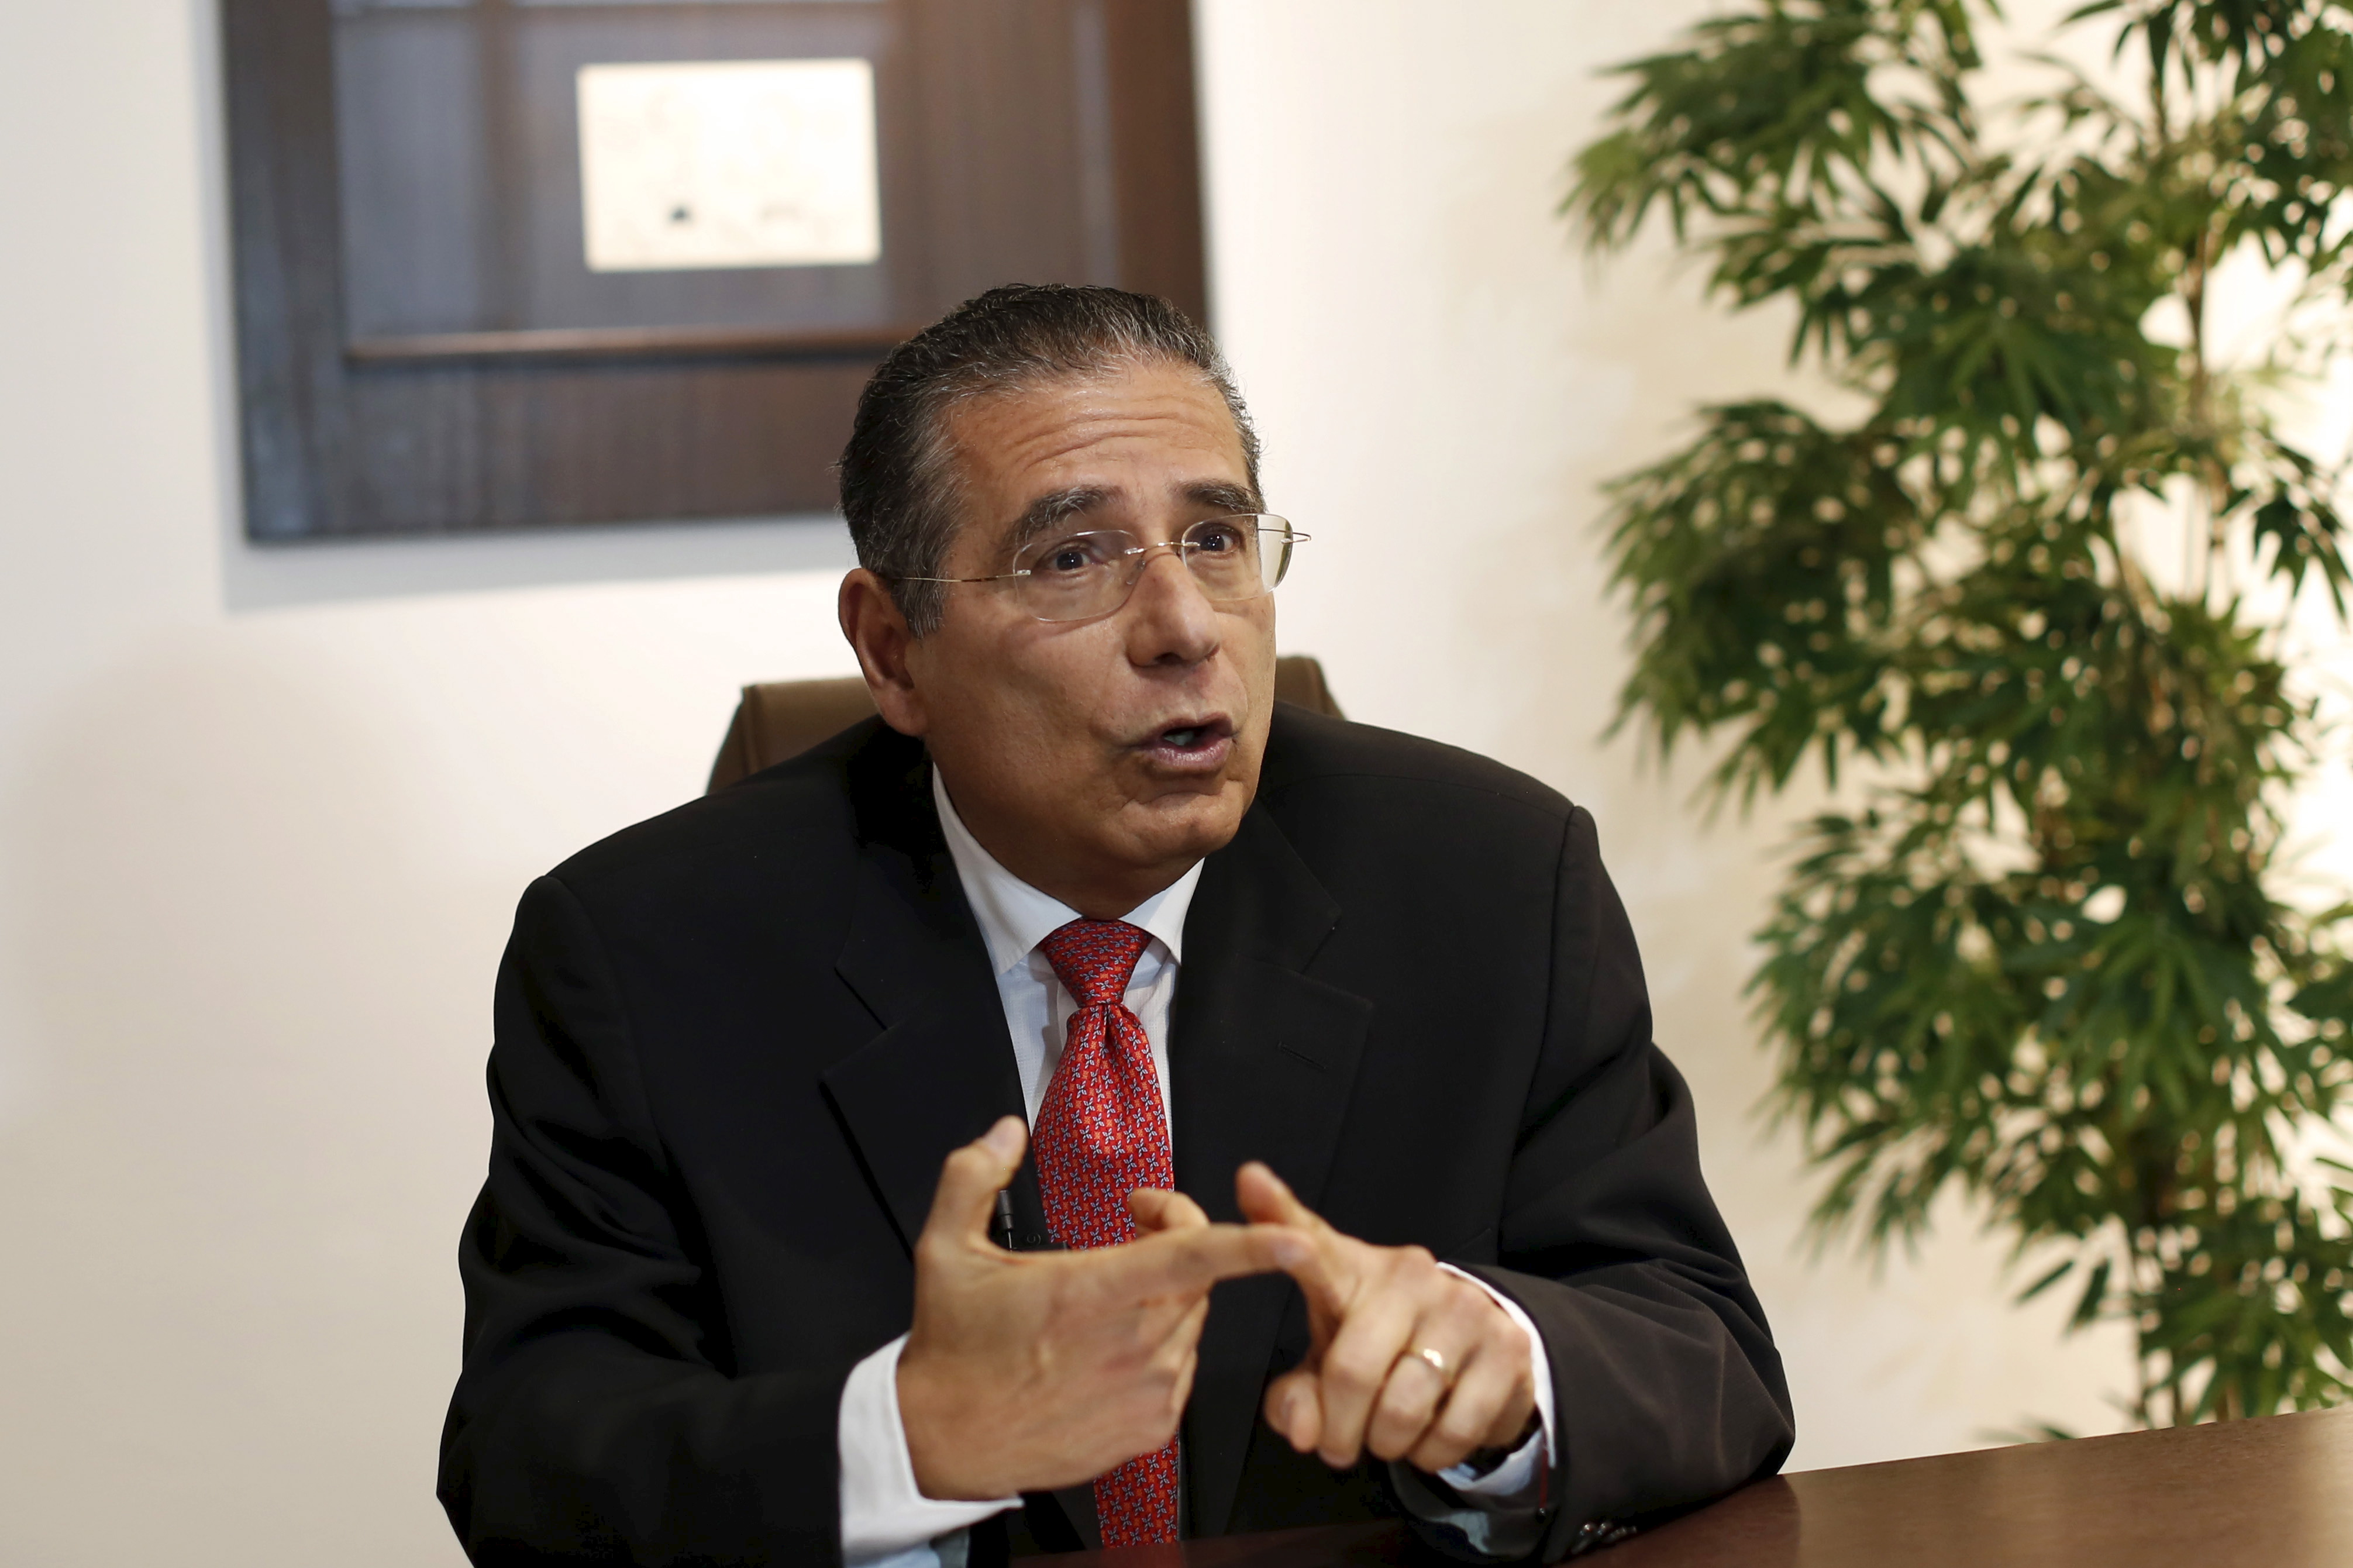 Ramon Fonseca, founding partner of law firm Mossack Fonseca, gestures during an interview with Reuters at his office in Panama City